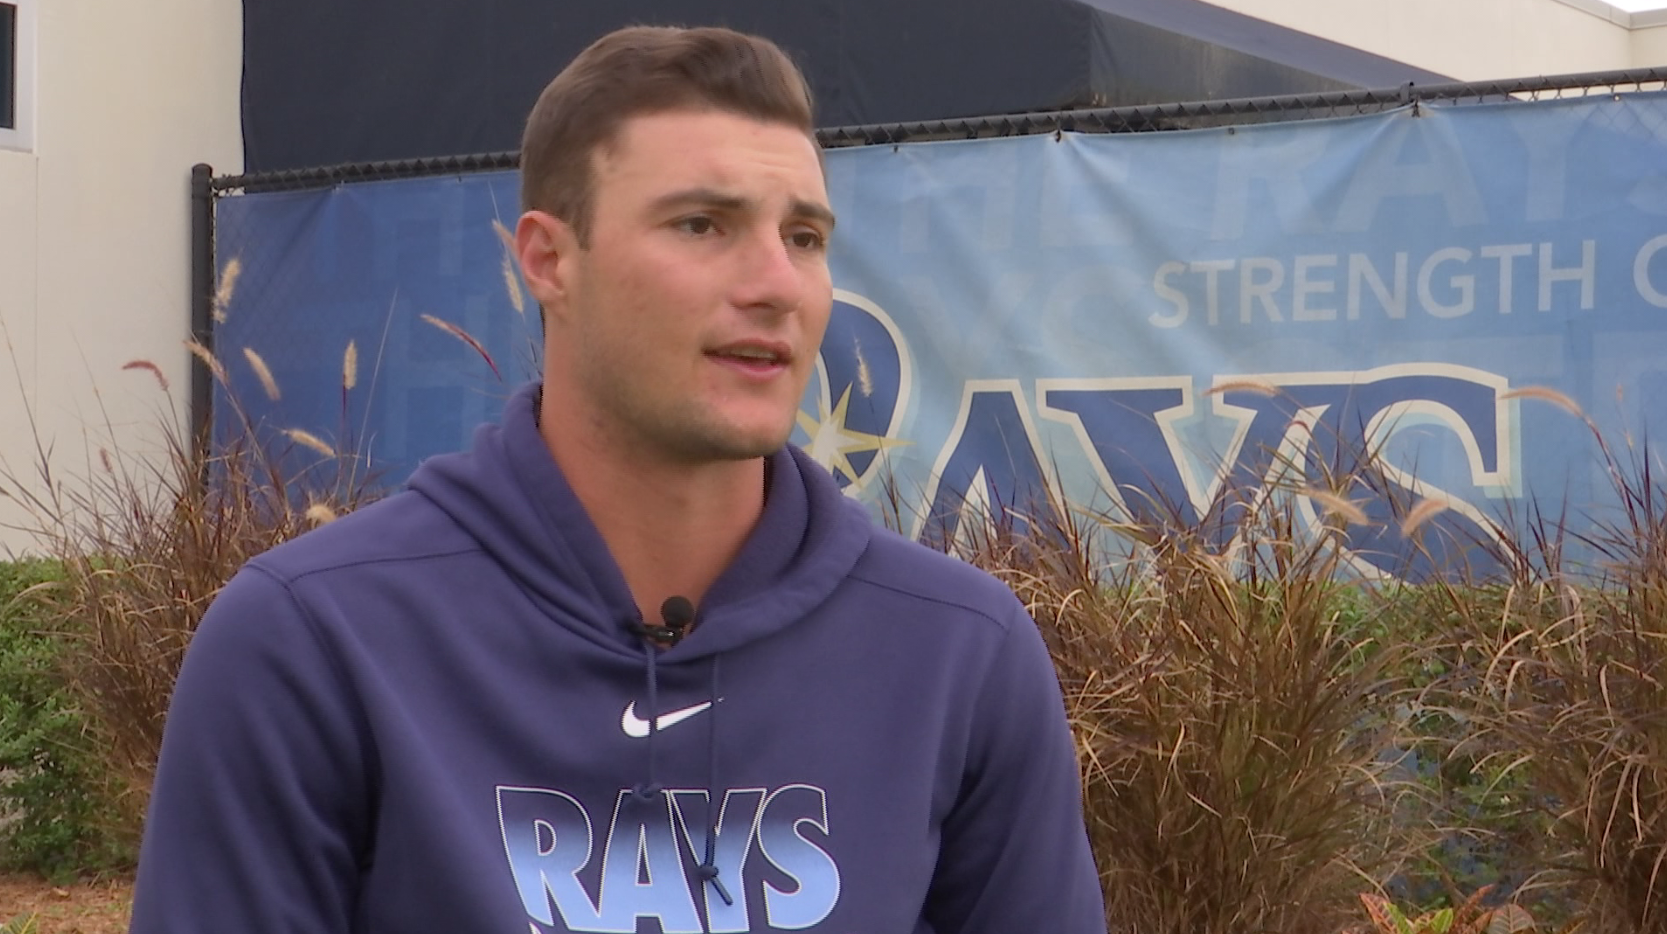 SWFL native comes from baseball bloodline, has chance with Tampa Bay Rays -  WINK News